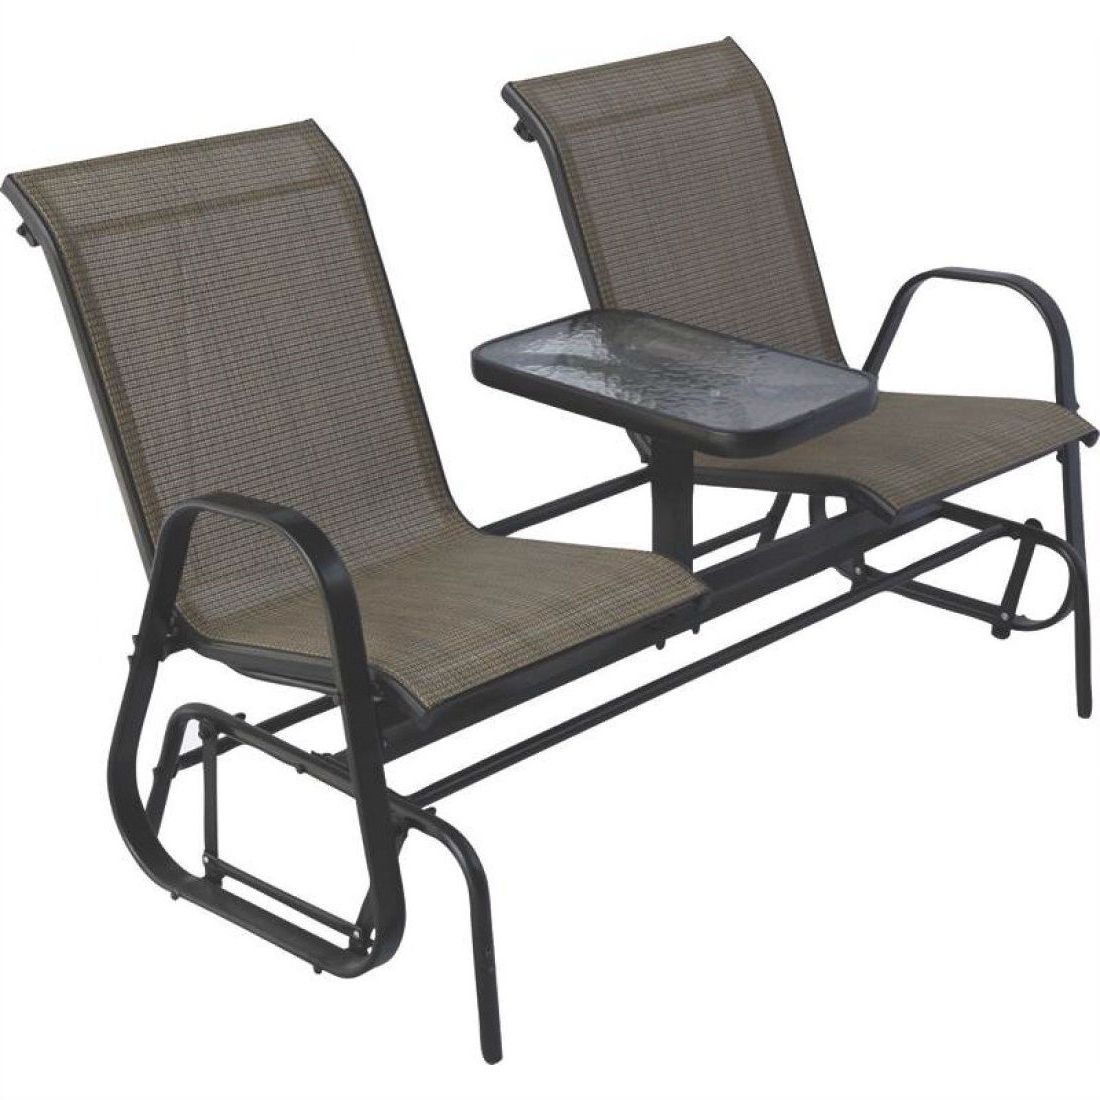 Preferred 2 Person Outdoor Patio Furniture Glider Chairs With Console Table Within Outdoor Patio Swing Glider Bench Chair S (View 12 of 25)